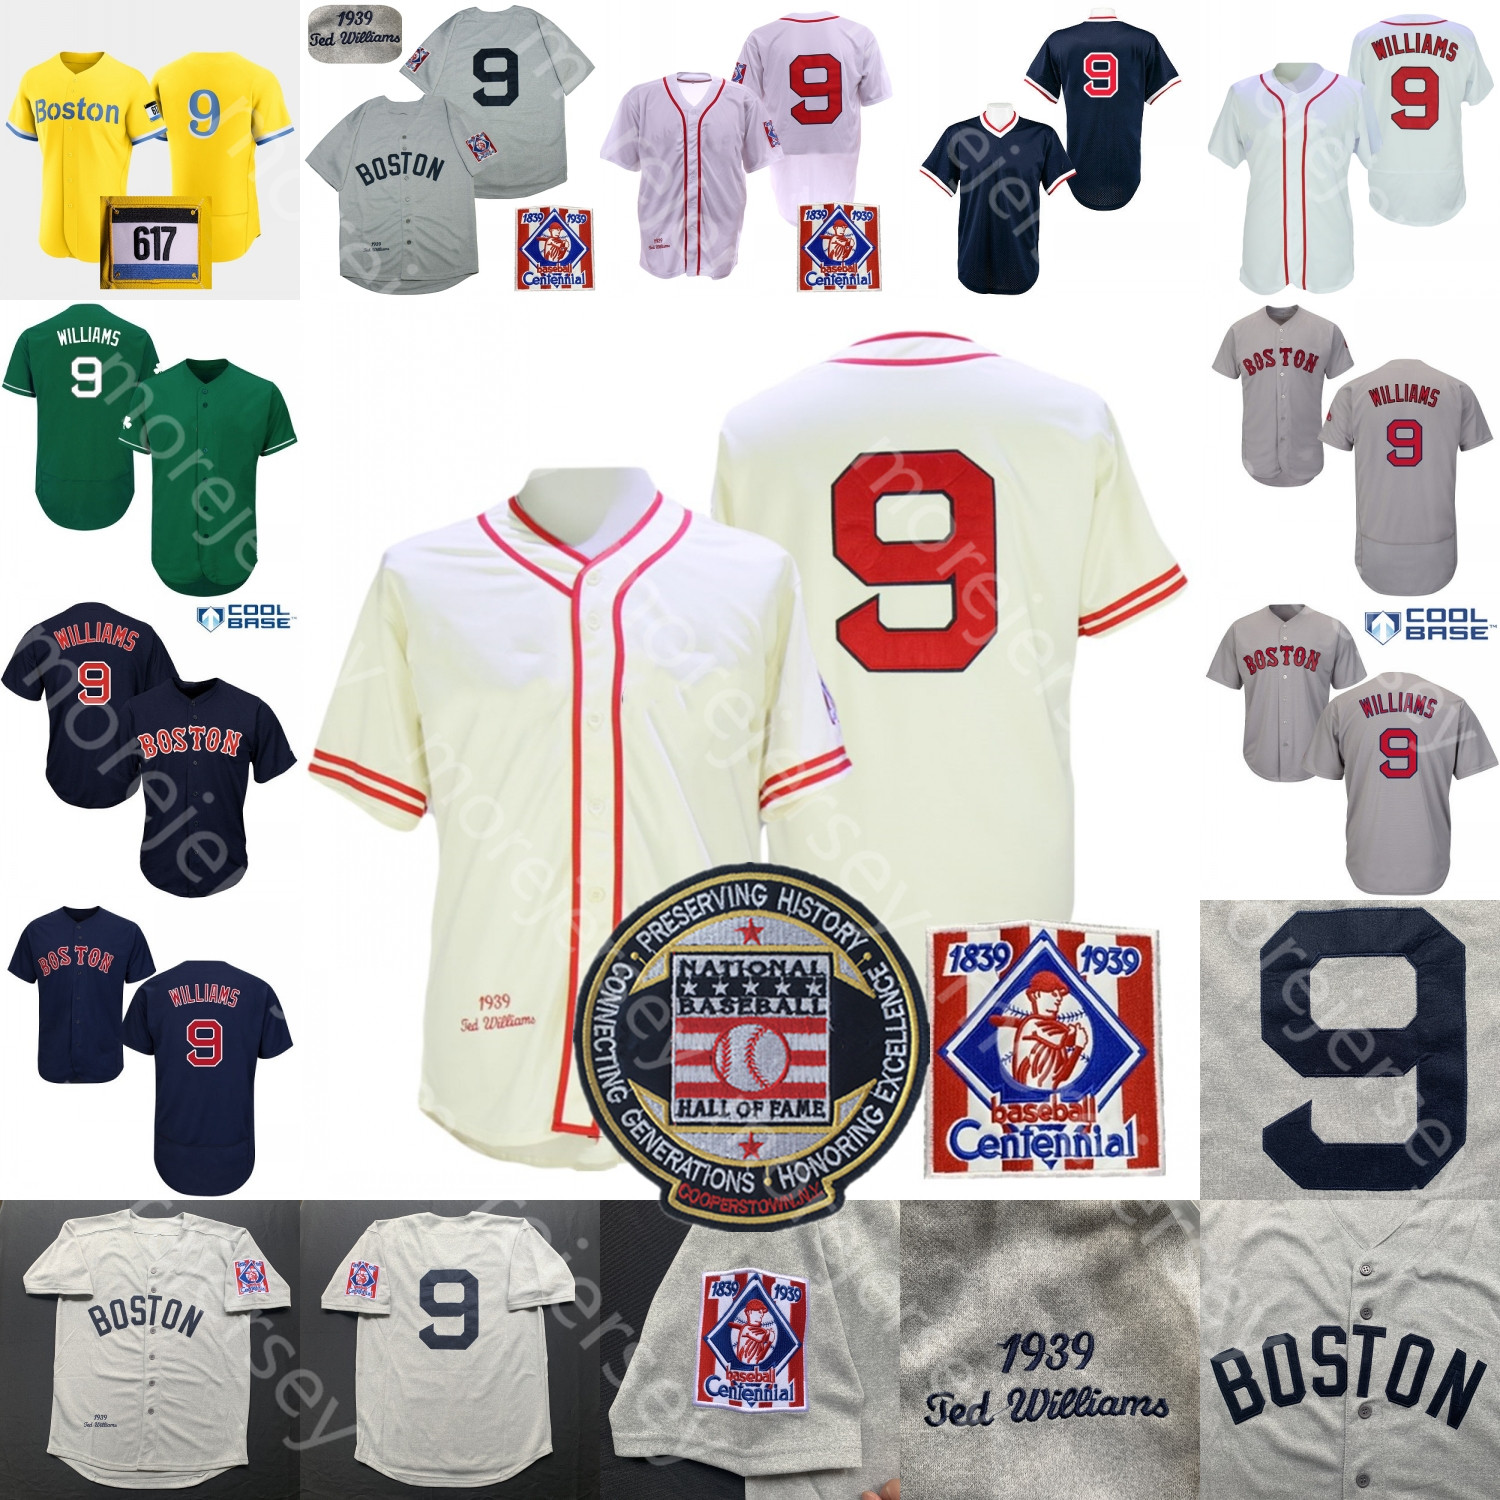 Ted Williams Jersey Hall Of Fame Patch 1939 Cream Grey White Cooperstown 2021 City Connect Player Fathers Day Salute to Service Grey Navy Red White Fans Player Green